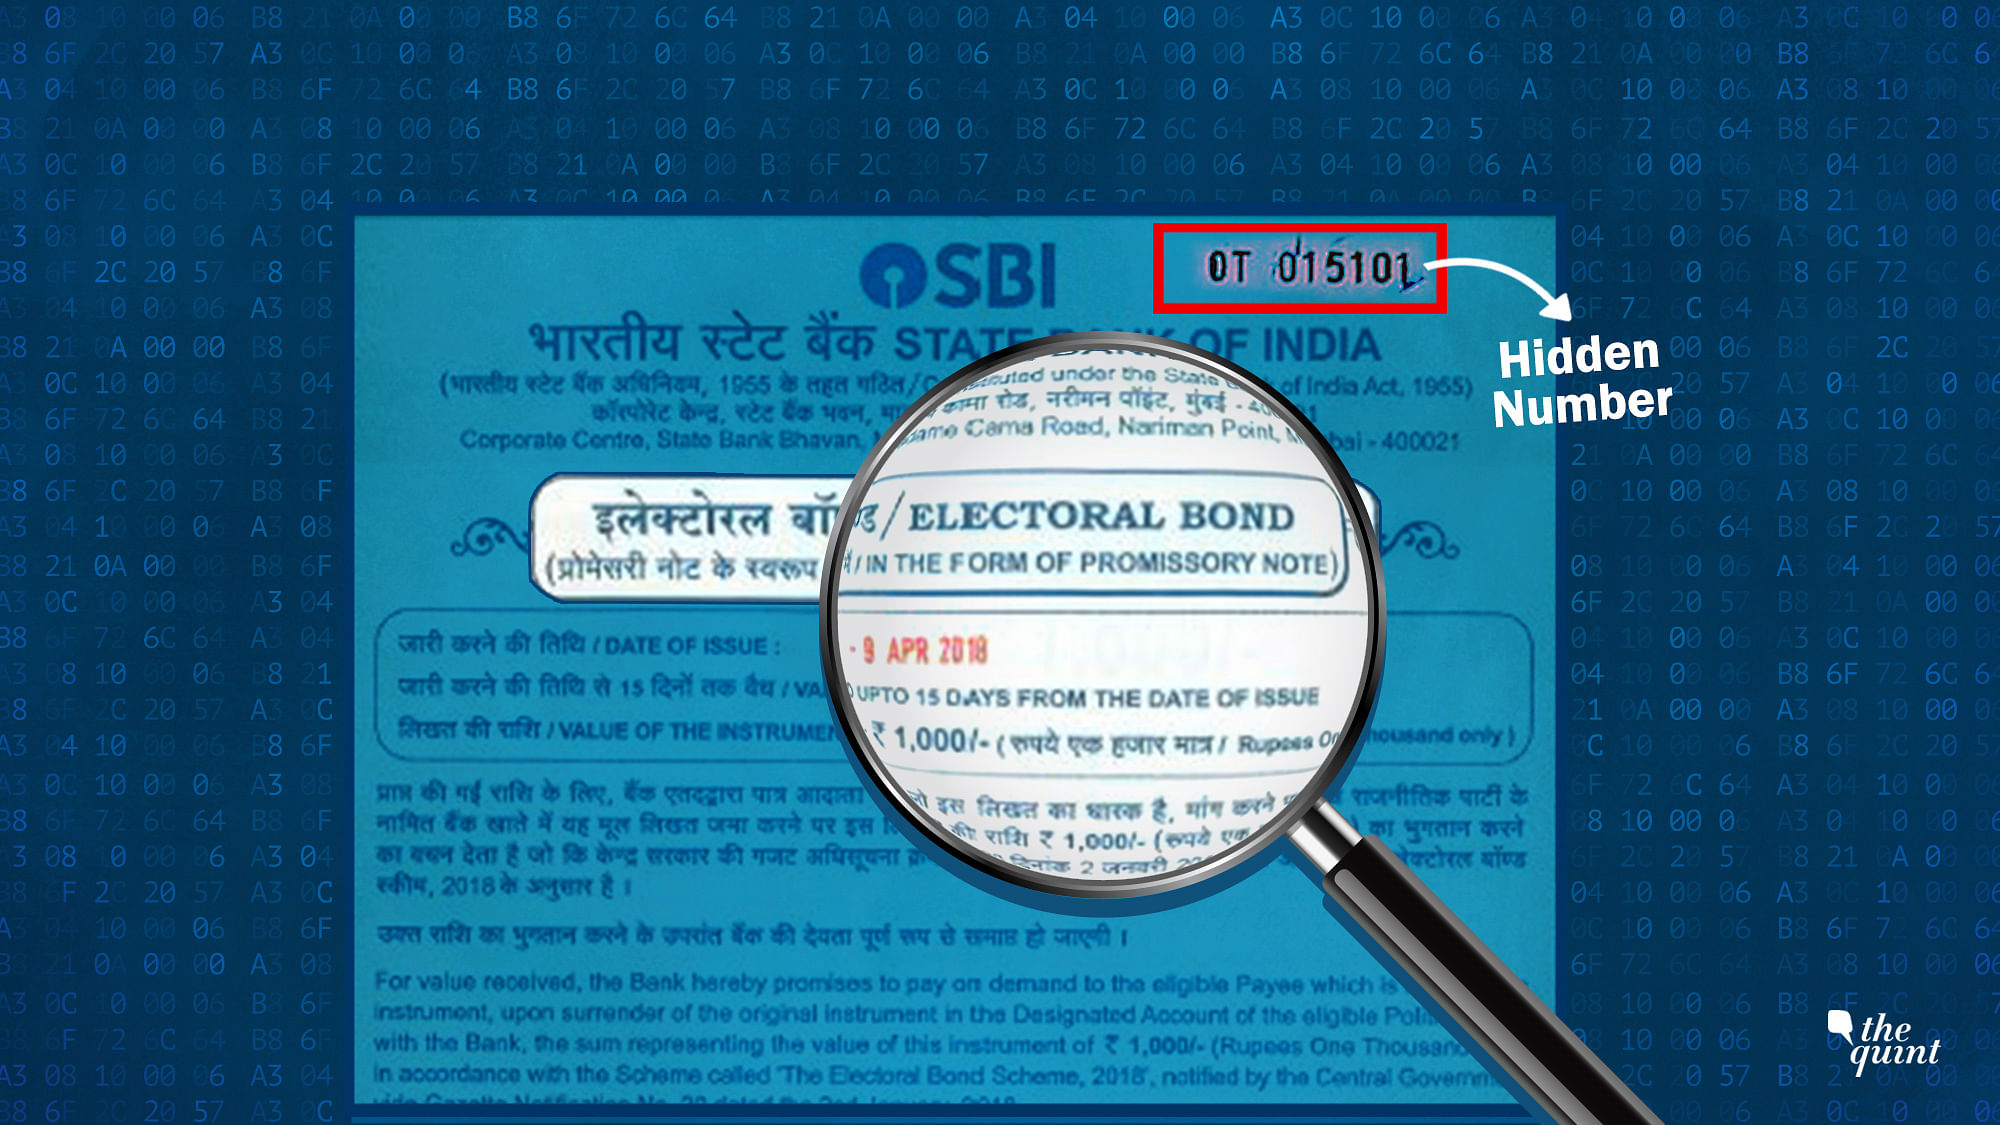 <div class="paragraphs"><p>Electoral Bonds:&nbsp;<strong>The Quint</strong>'s investigation revealed that electoral bonds have hidden numbers printed on them.</p></div>